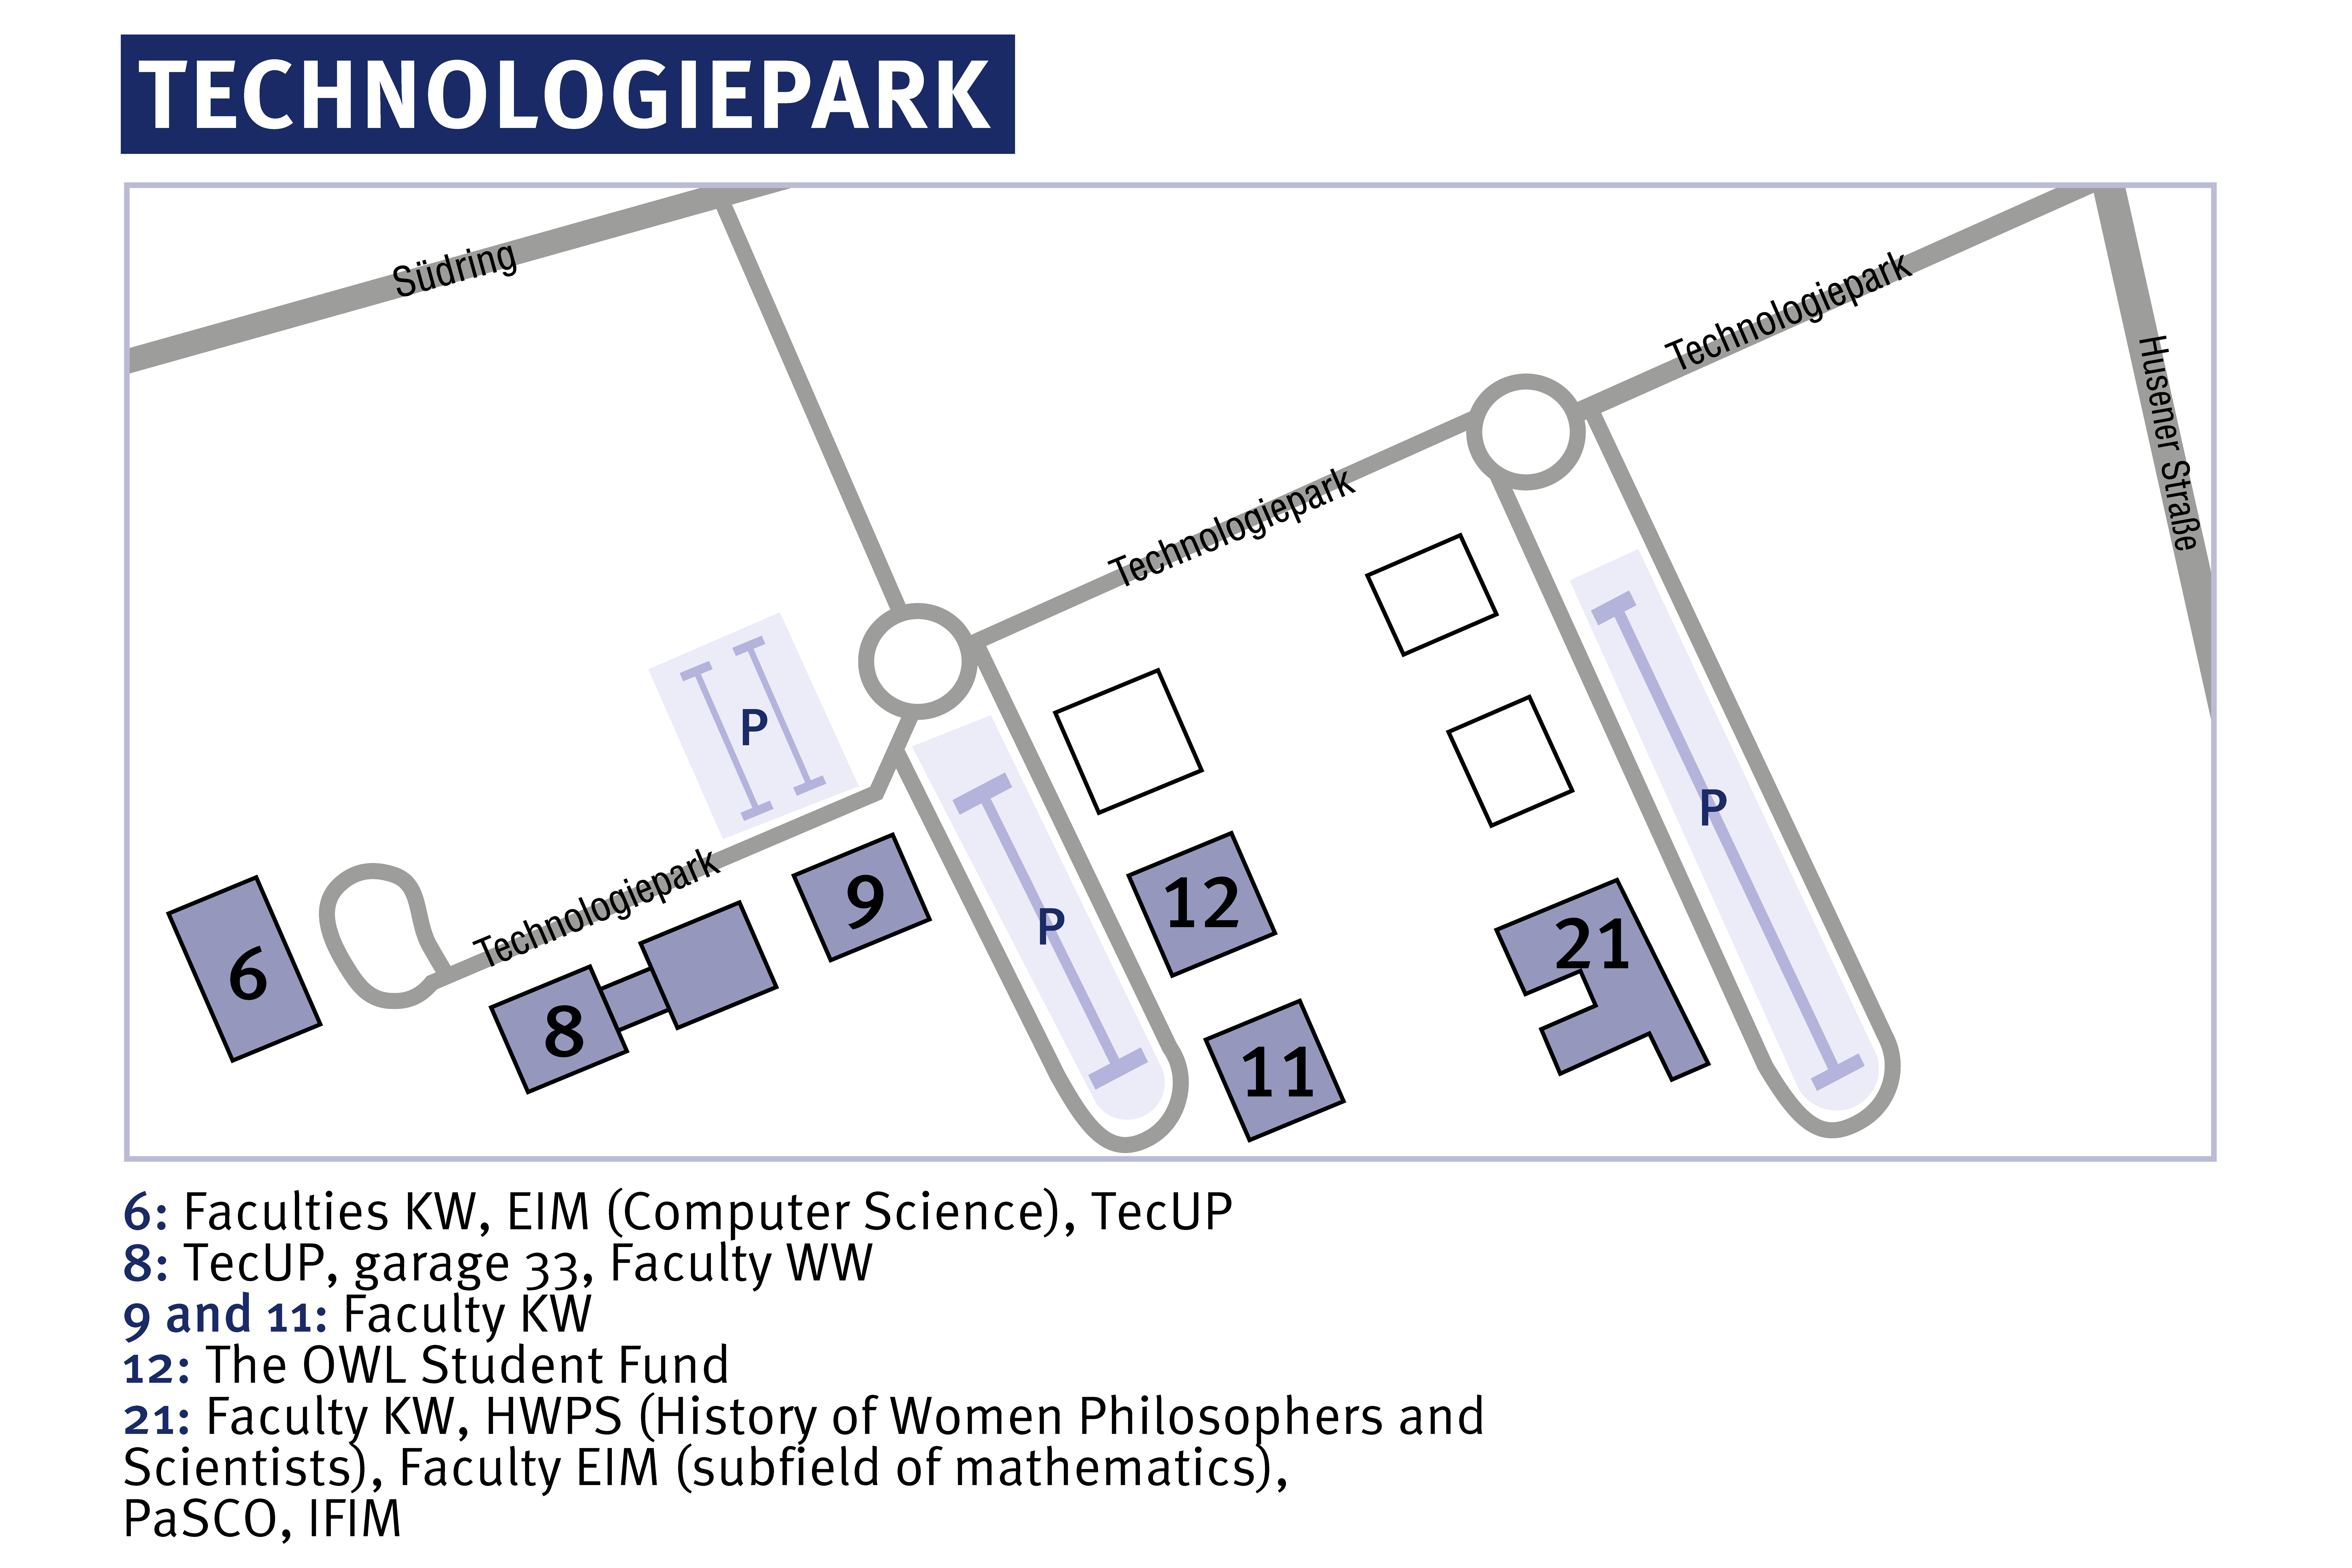 Guide Technologiepark (Status: May 2022), link to large image